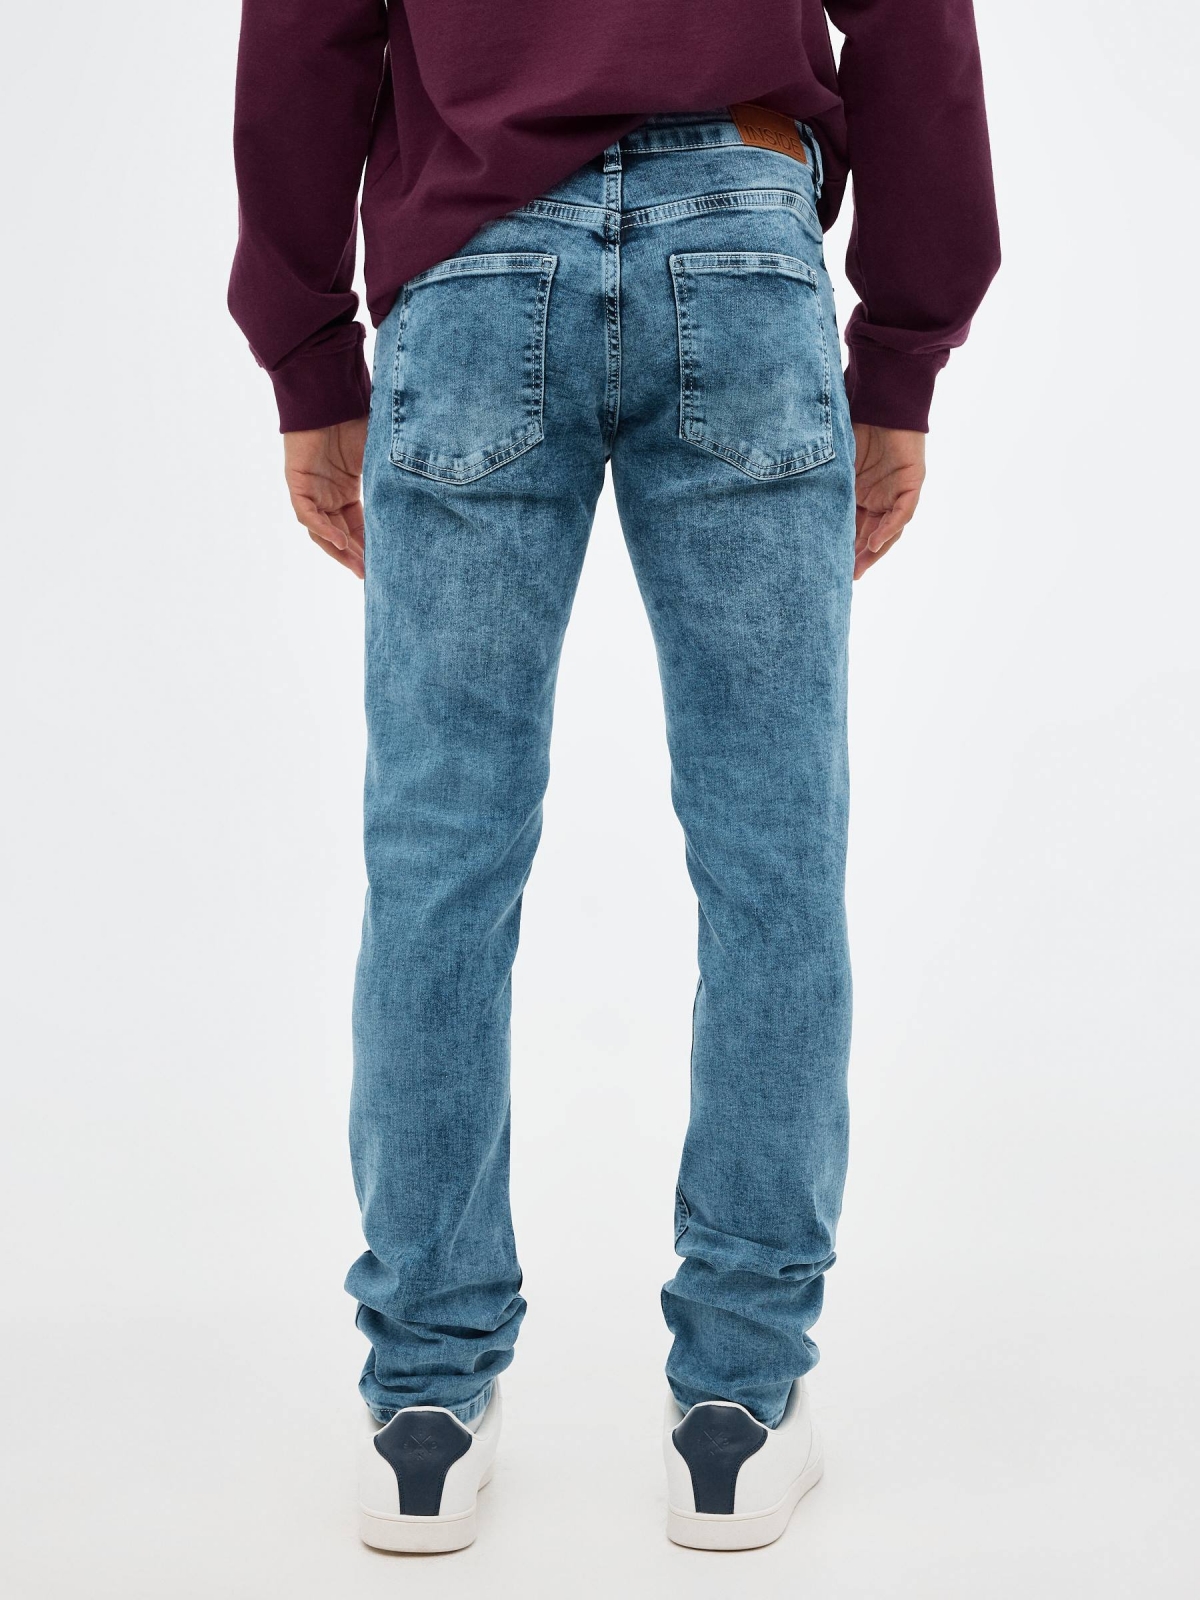 Worn out blue slim jeans blue middle back view